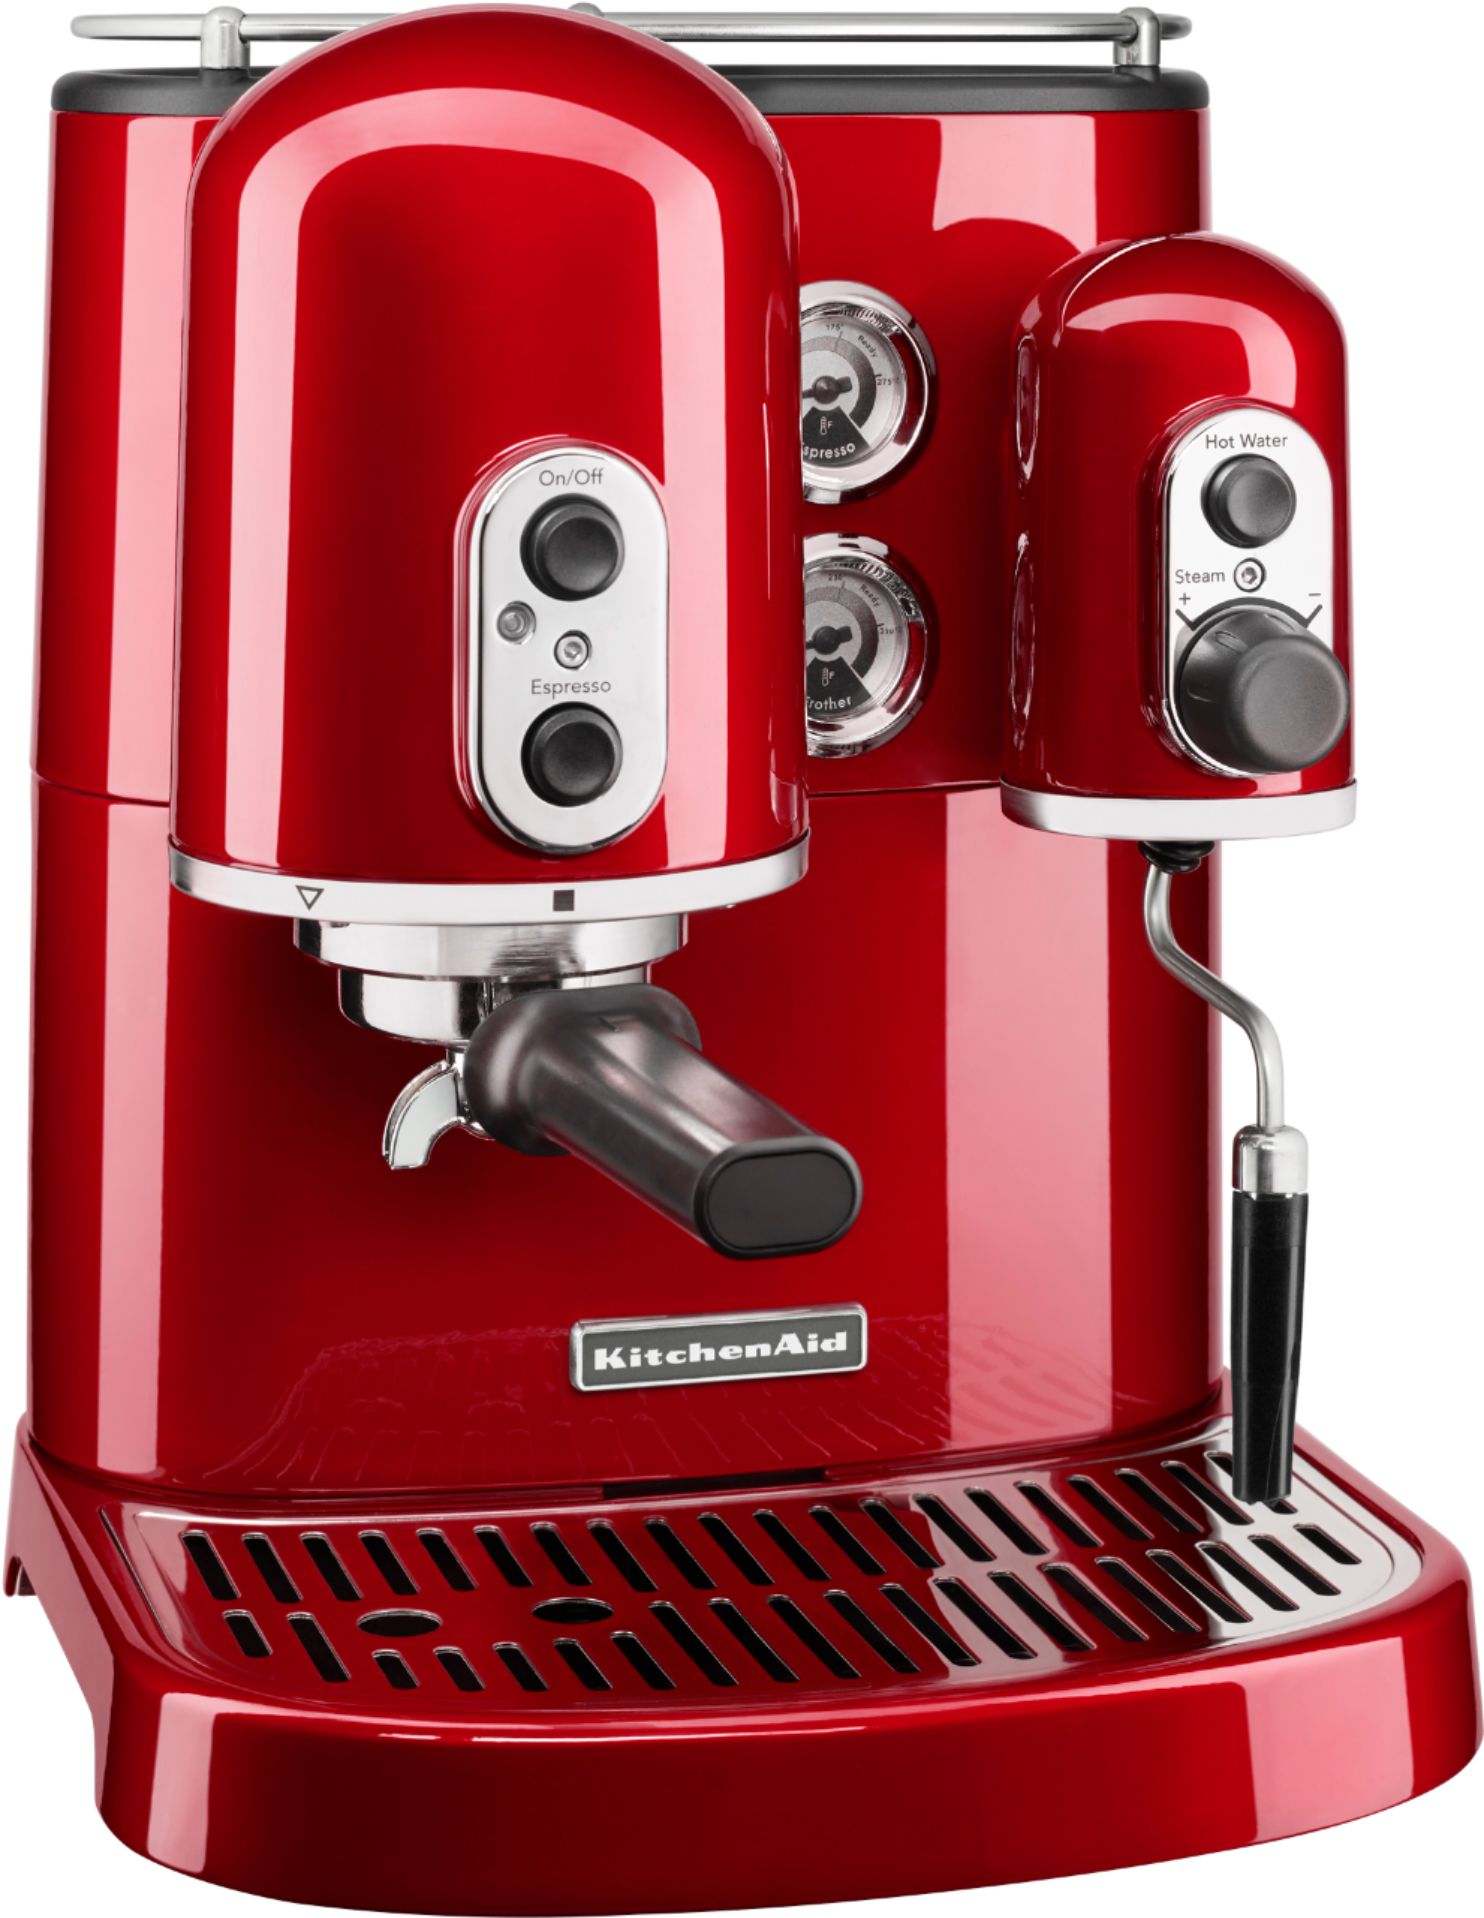 KitchenAid Pro Line Series Espresso Machine with 15 bars of pressure and  Milk Frother Candy Apple Red KES2102CA - Best Buy